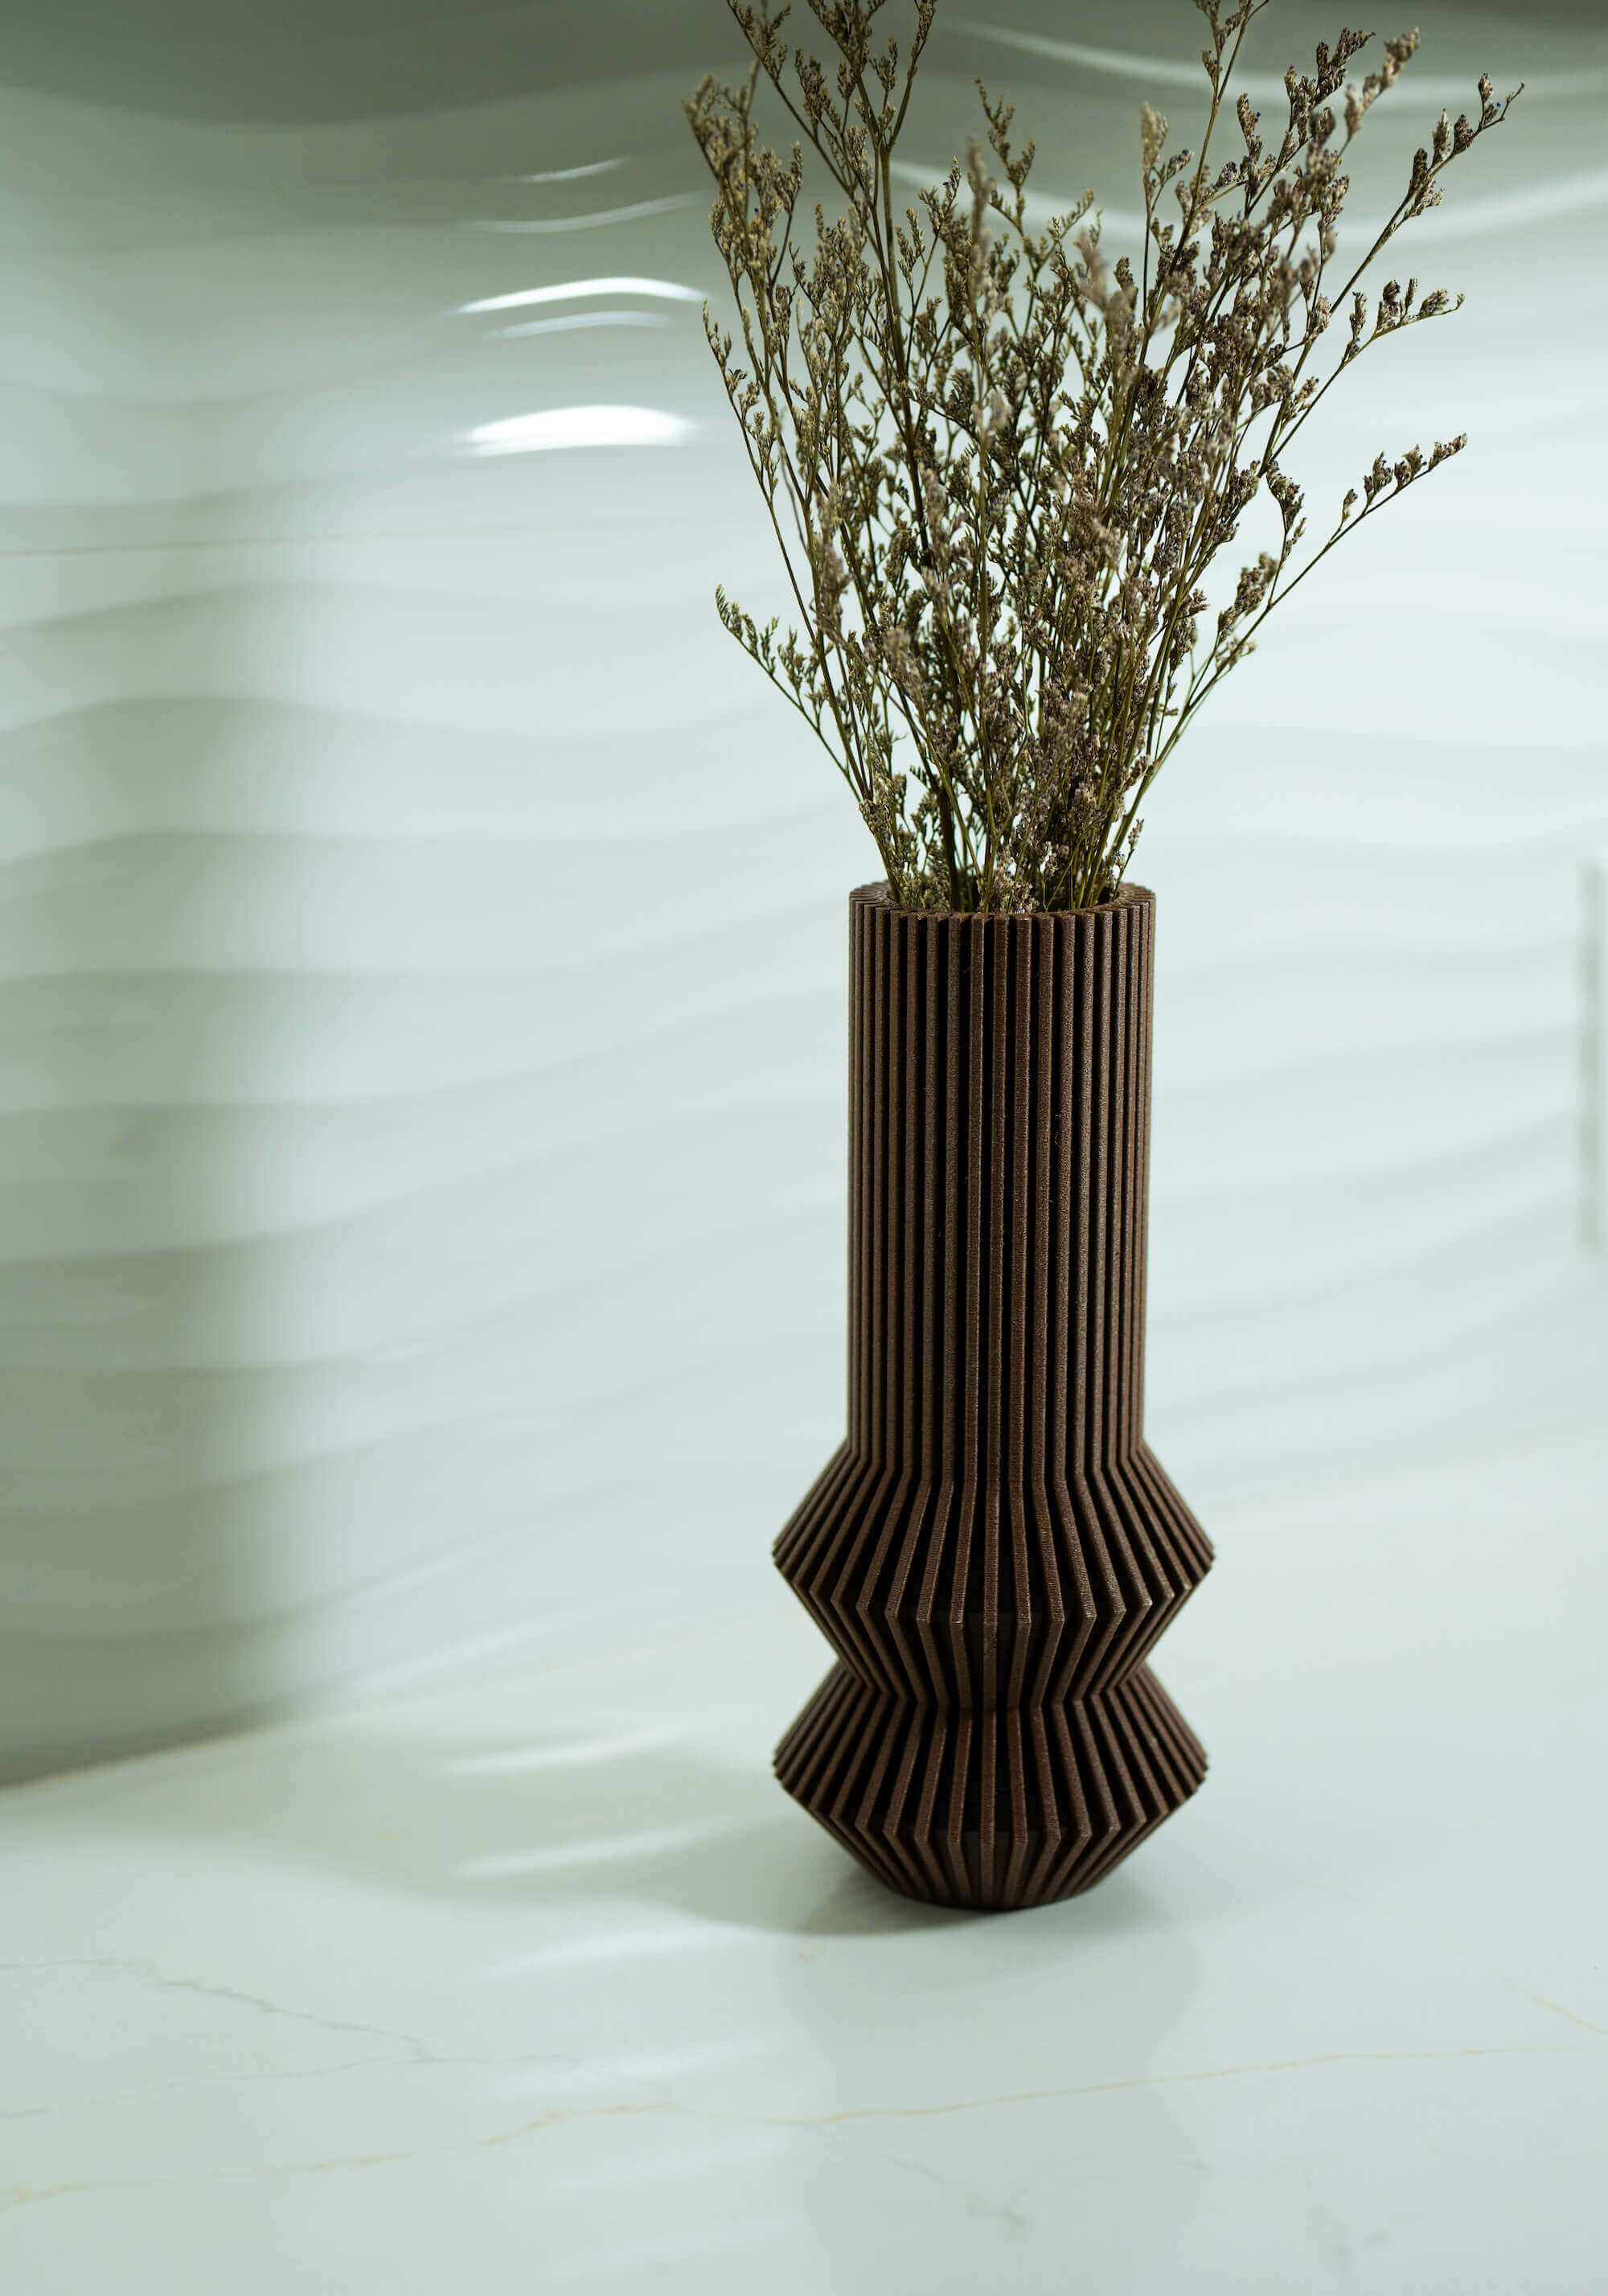 A mid century modern vase / modernist vase by Woodland Pulse. This is a brown vase on a kitchen countertop with pampas grass.